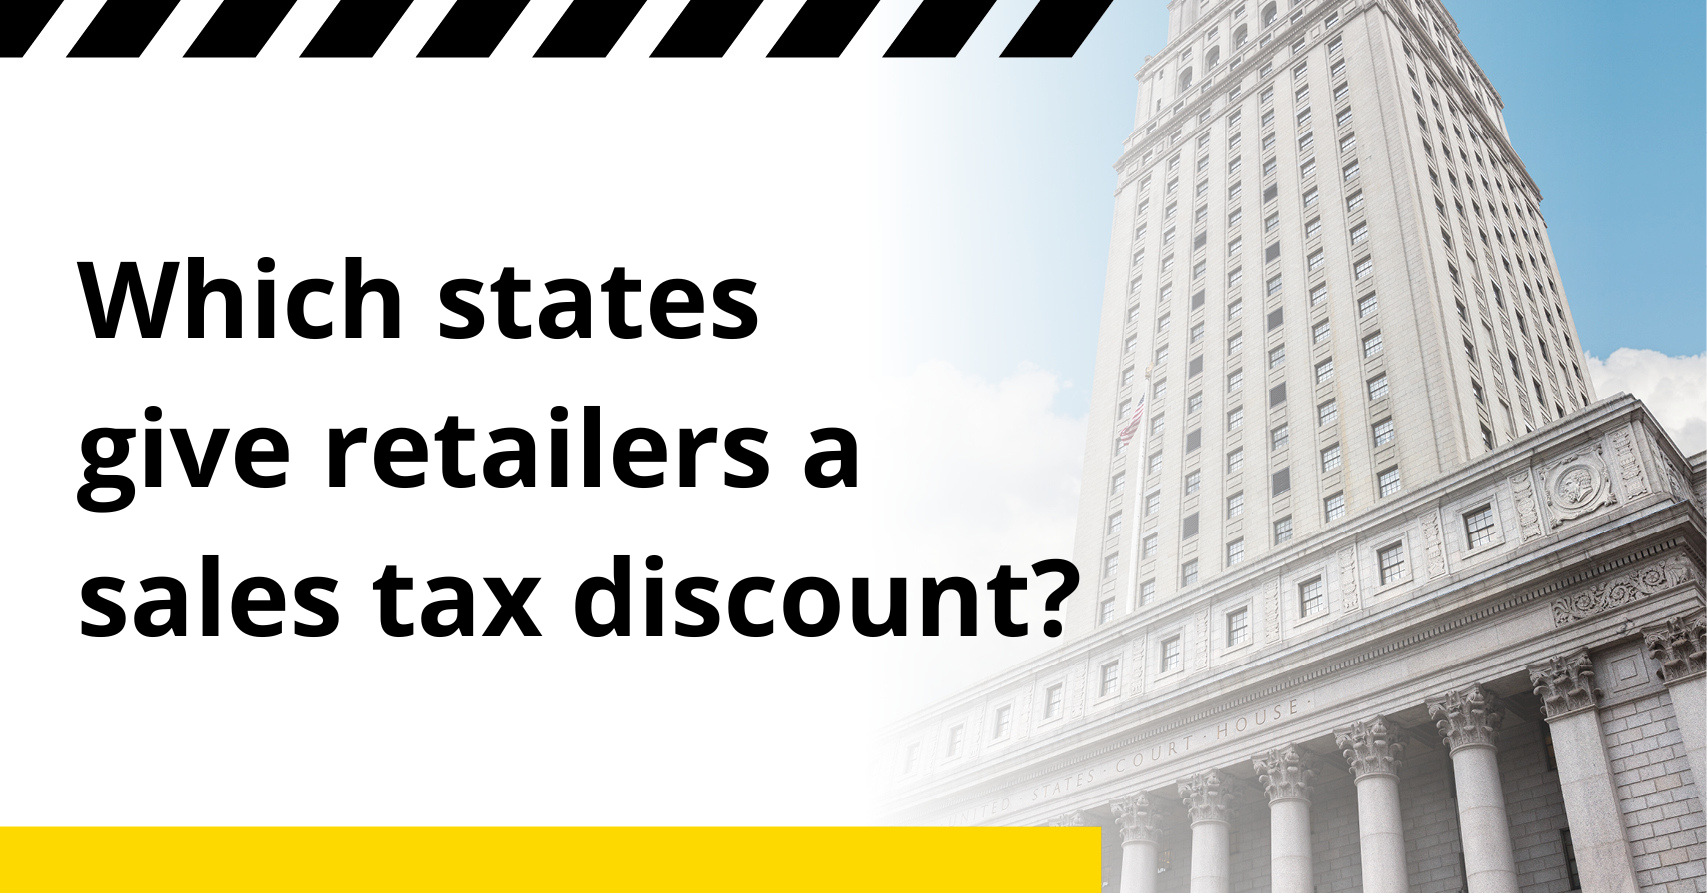 Some states give retailers a sales tax discount if you file and pay on time. Find out which states and how much the discount is here.